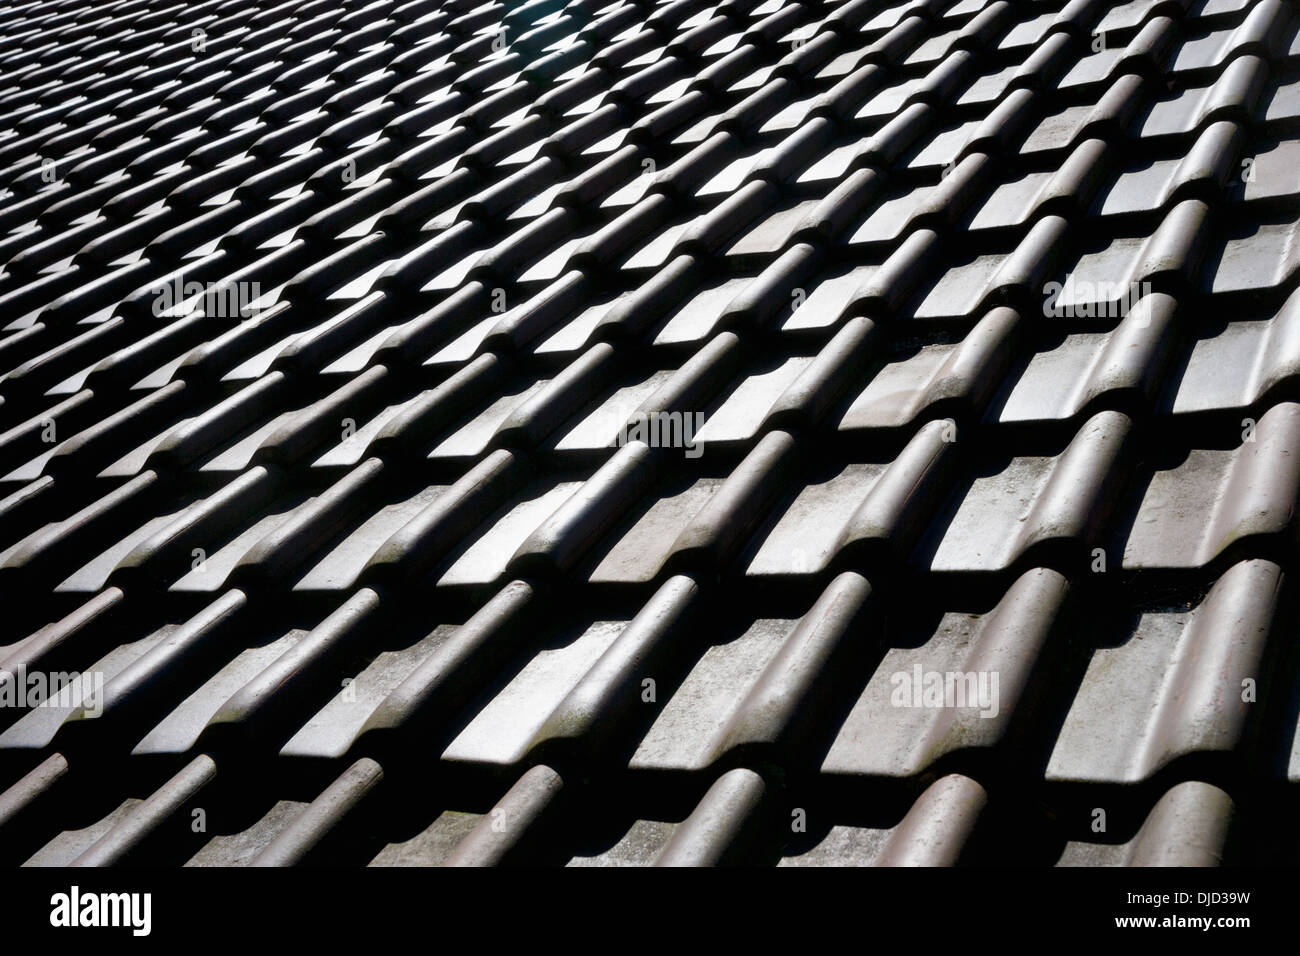 Tiled roof Stock Photo